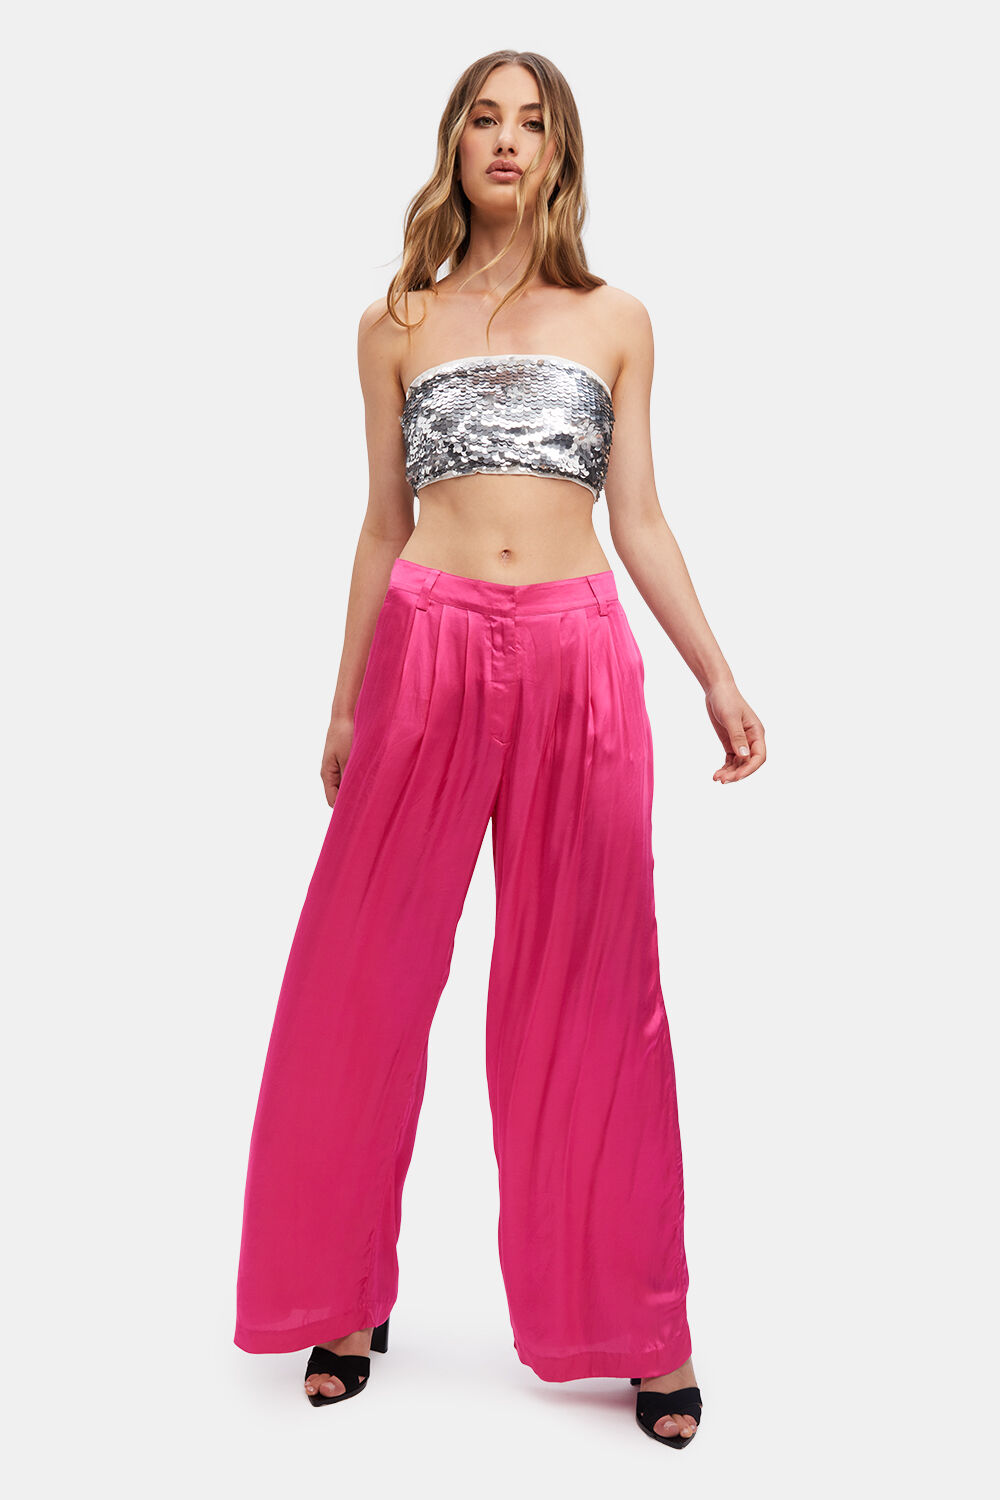 LENA PIN TUCK PANT in colour HOT PINK